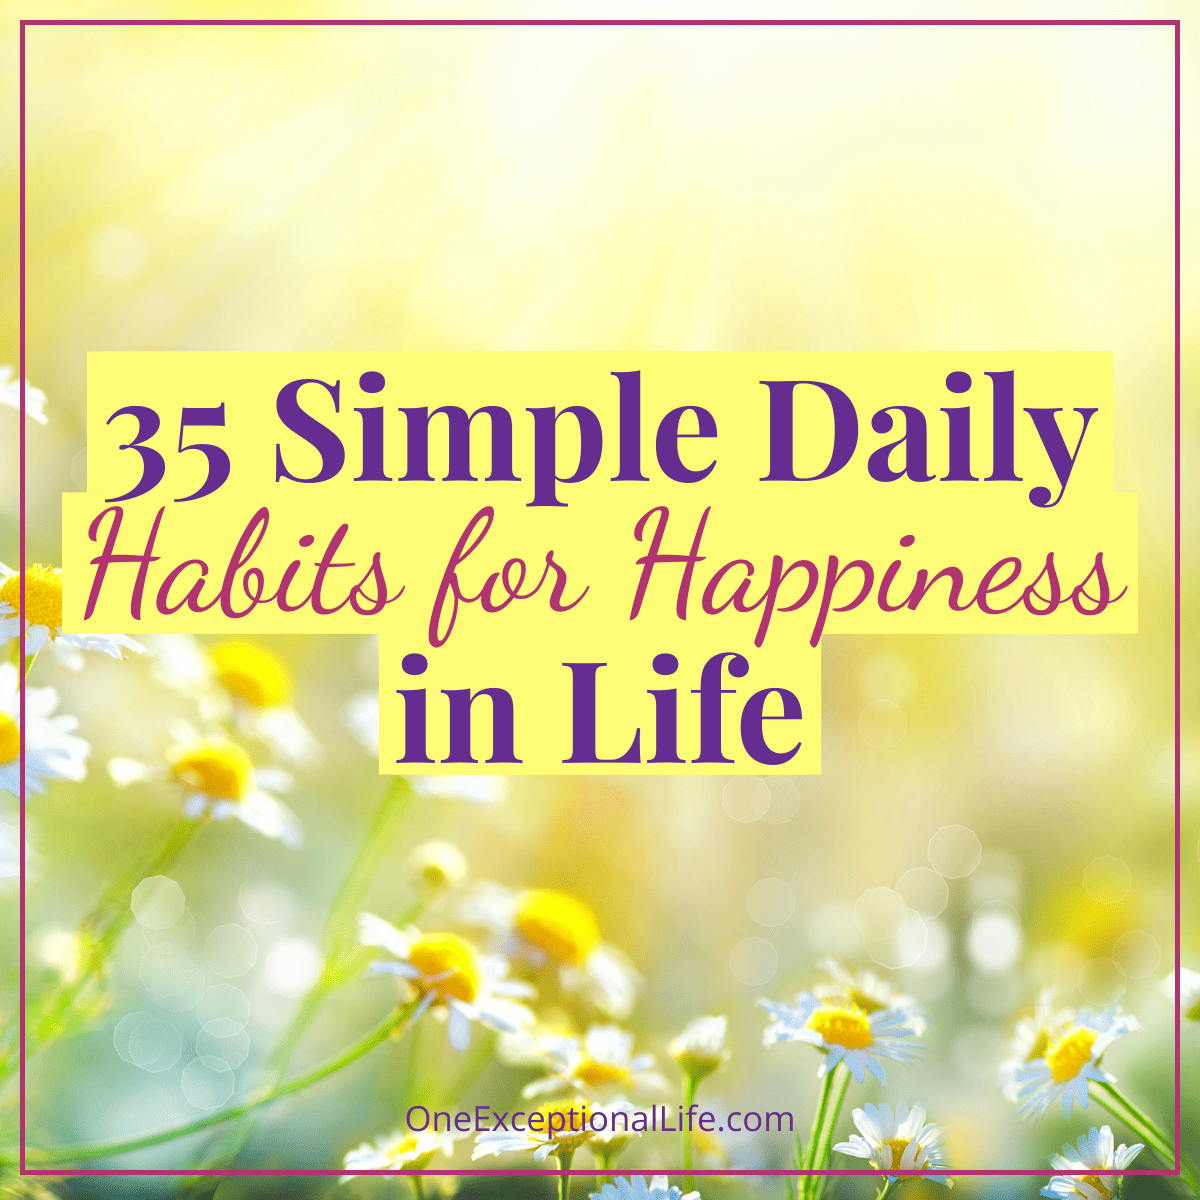 35 Simple Daily Habits for Happiness in Life